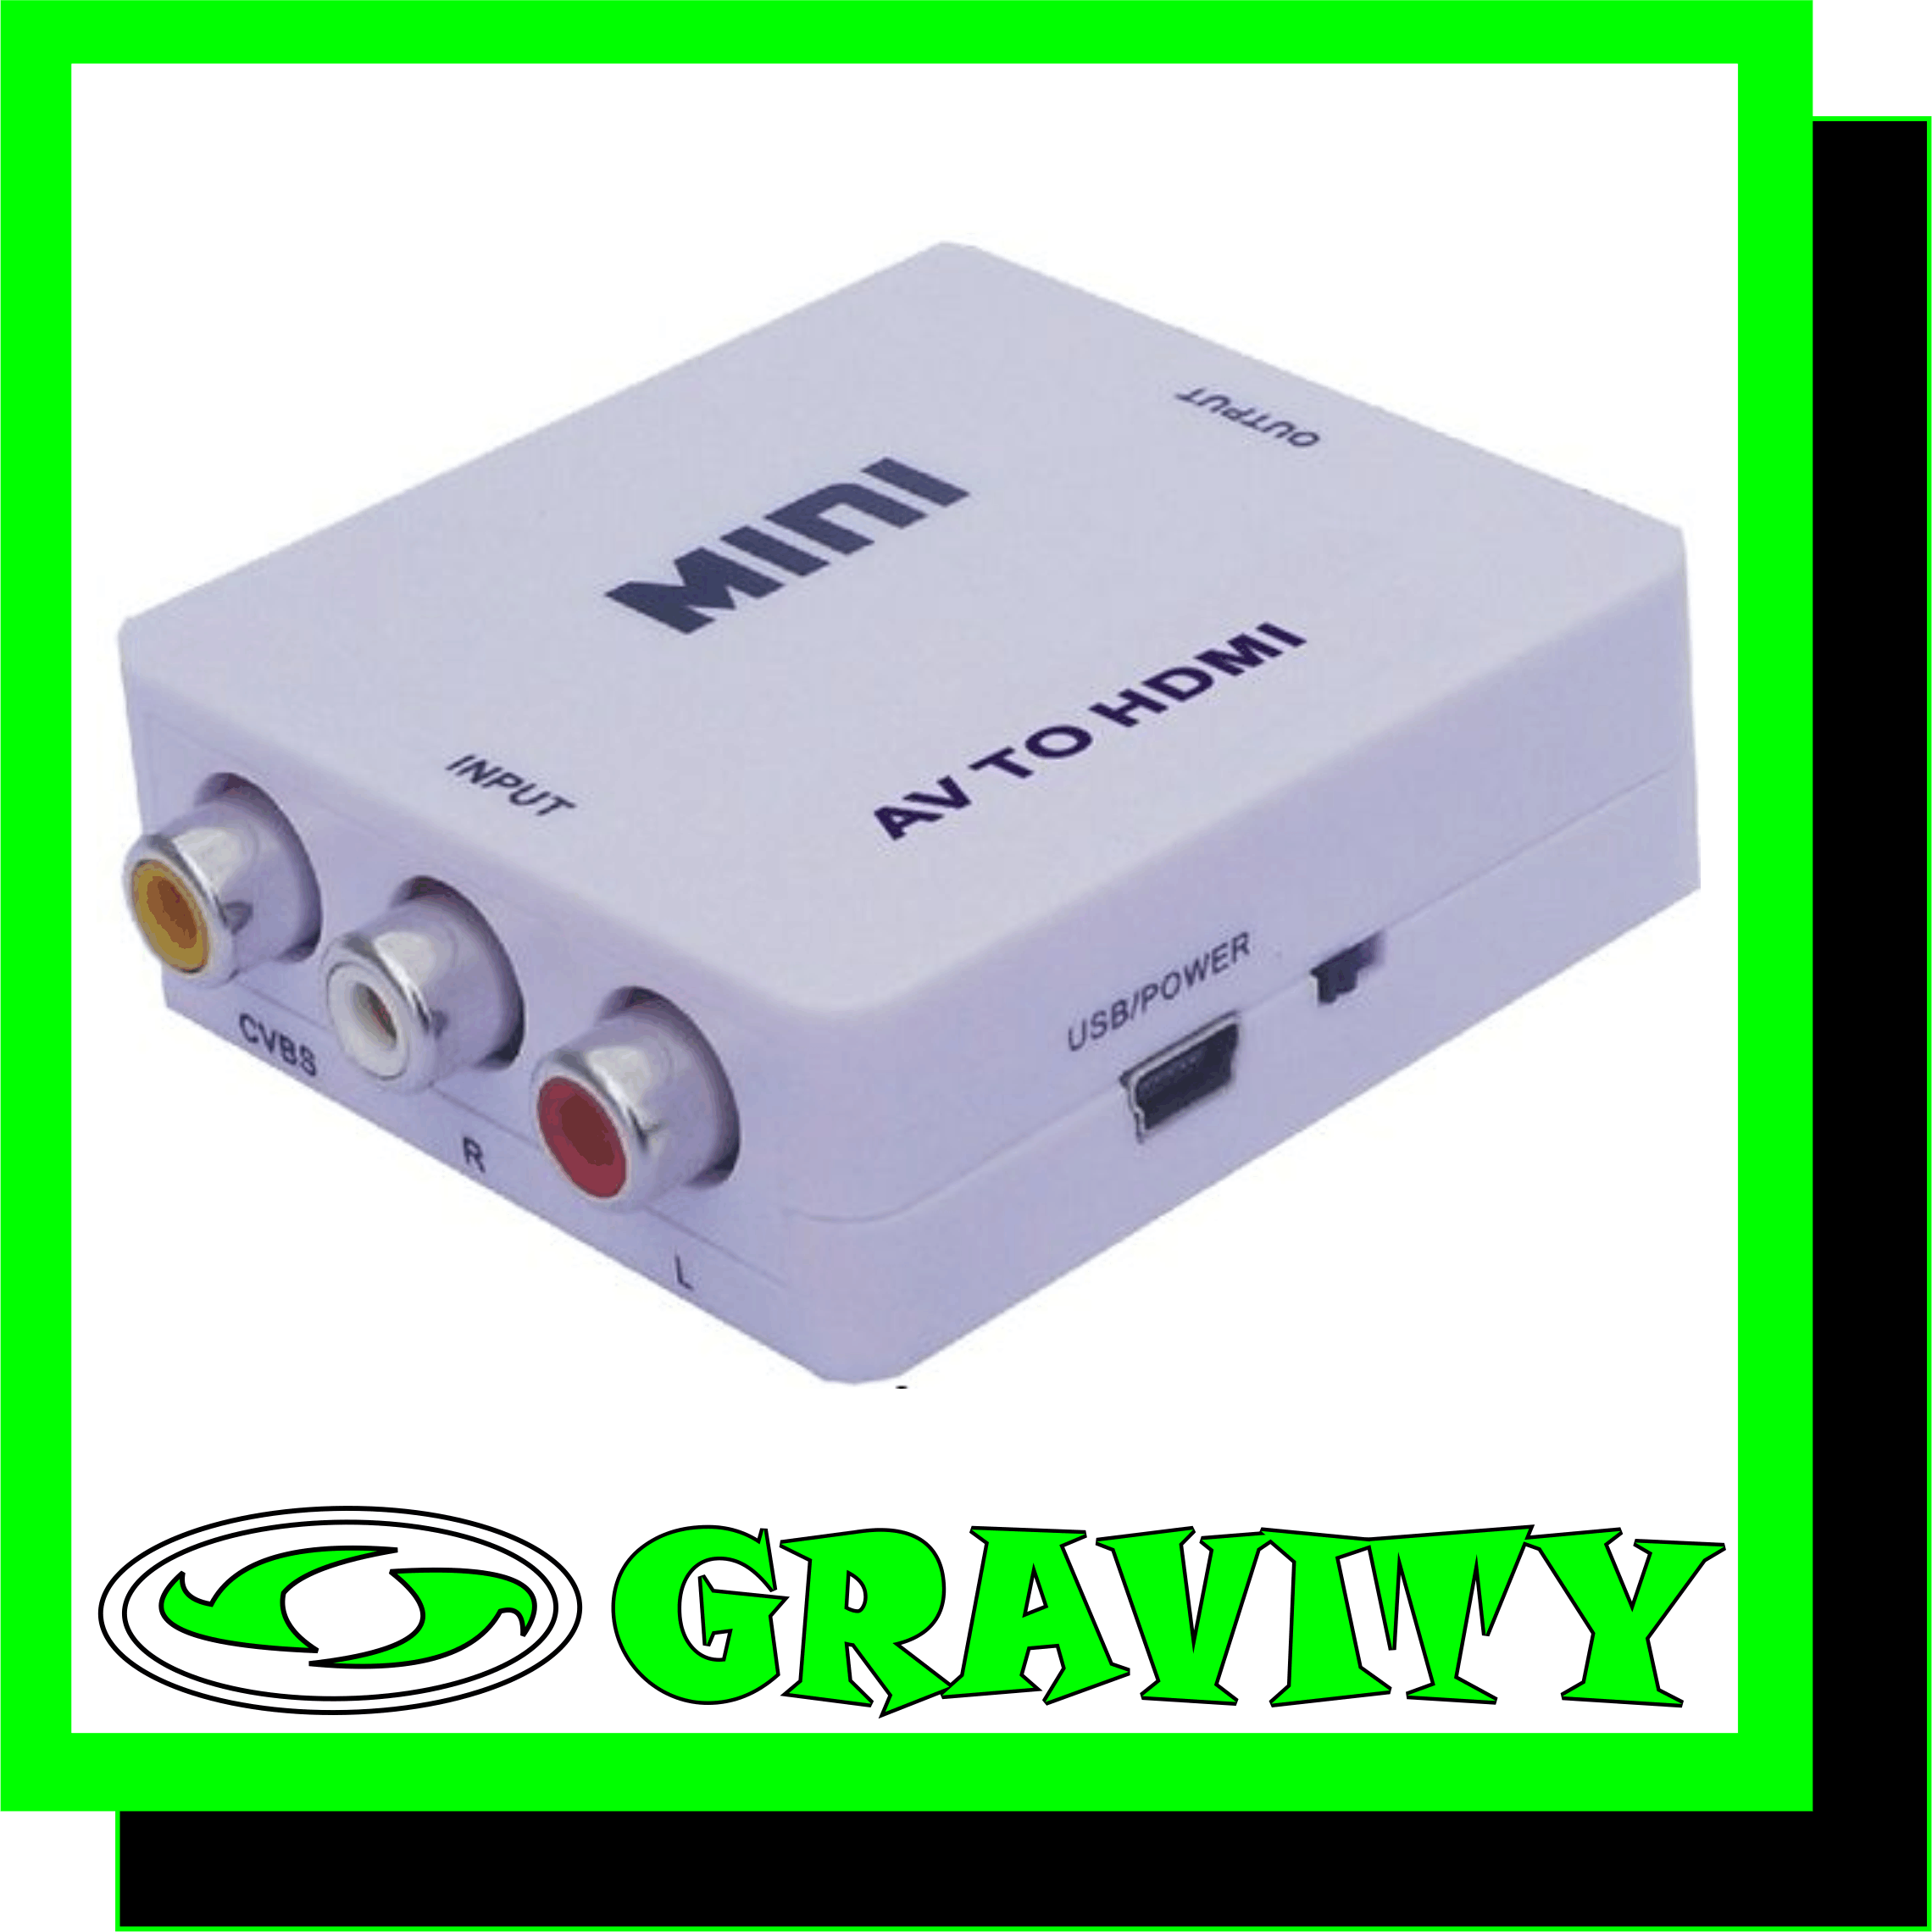 DESCRIPTION: The MINI box type AV to HDMI converter is a universal converter for analog composite input to HDMI 1080p (60Hz) output. The analog to digital conversion in this module employs 10 bits maximal 162MSPS sampling, black/white level expansion, color transition improvement, dynamic range expansion, blue stretch, auto-detect and auto-convert the composite signal to 1080p(60Hz) output. Making video come alive, delivering the sharpest, most realistic HD visuals available.  Features 1. No need to install drivers, portable, flexible, plug and play. 2. Provide advanced signal processing with great precision, colors, resolutions, and details; 3. Support PAL, NTSC3.58, NTSC4.43, SECAM, PAL/M, PAL/N standard TV formats input. 4. Support HDMI 1080p or 720p output.